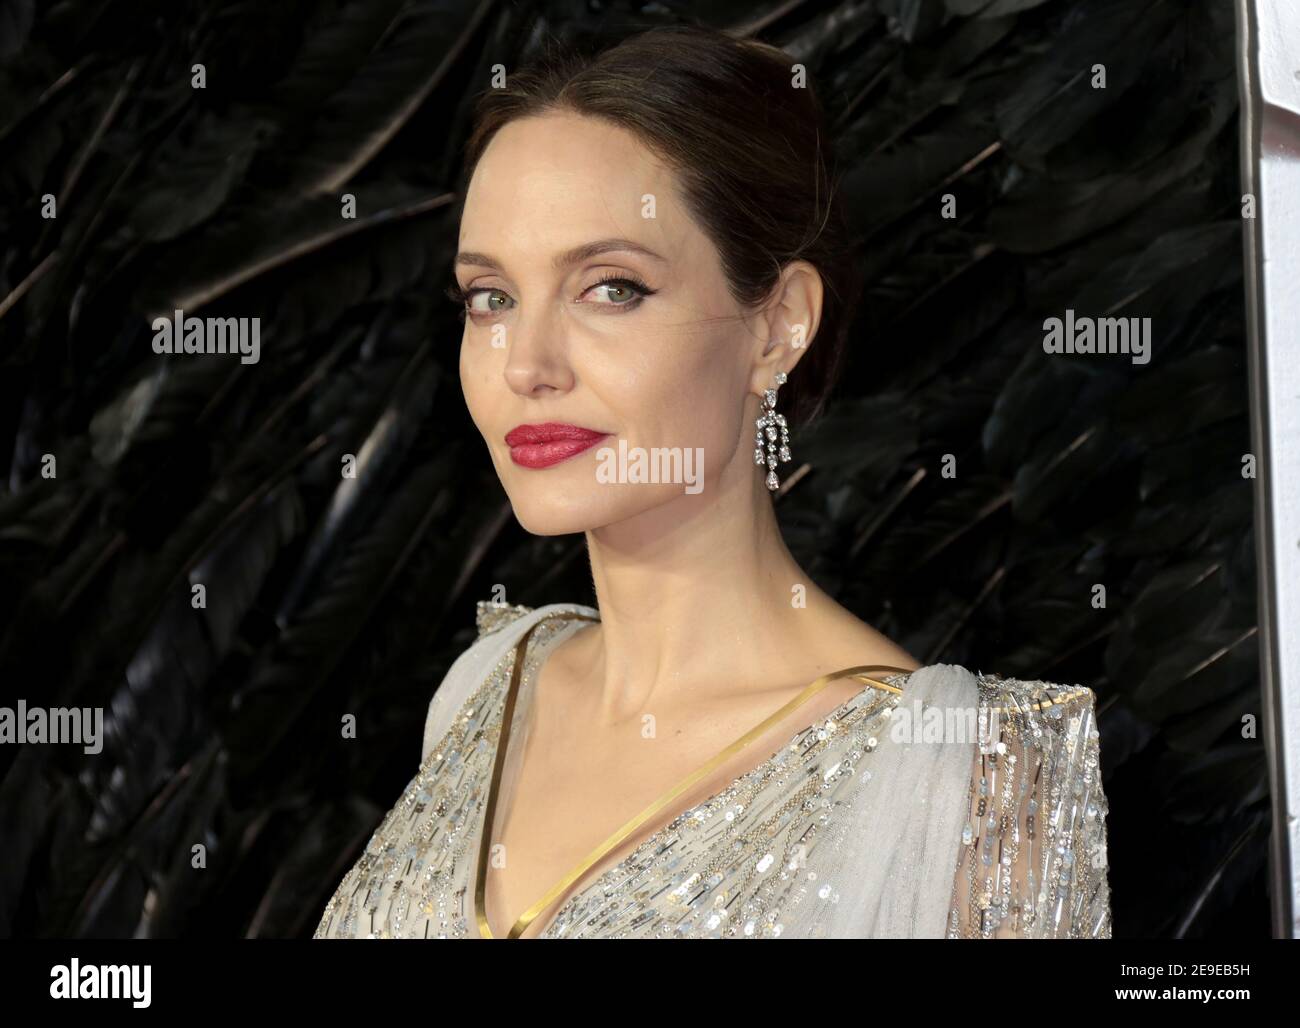 Jolie High Resolution Stock Photography and Images -